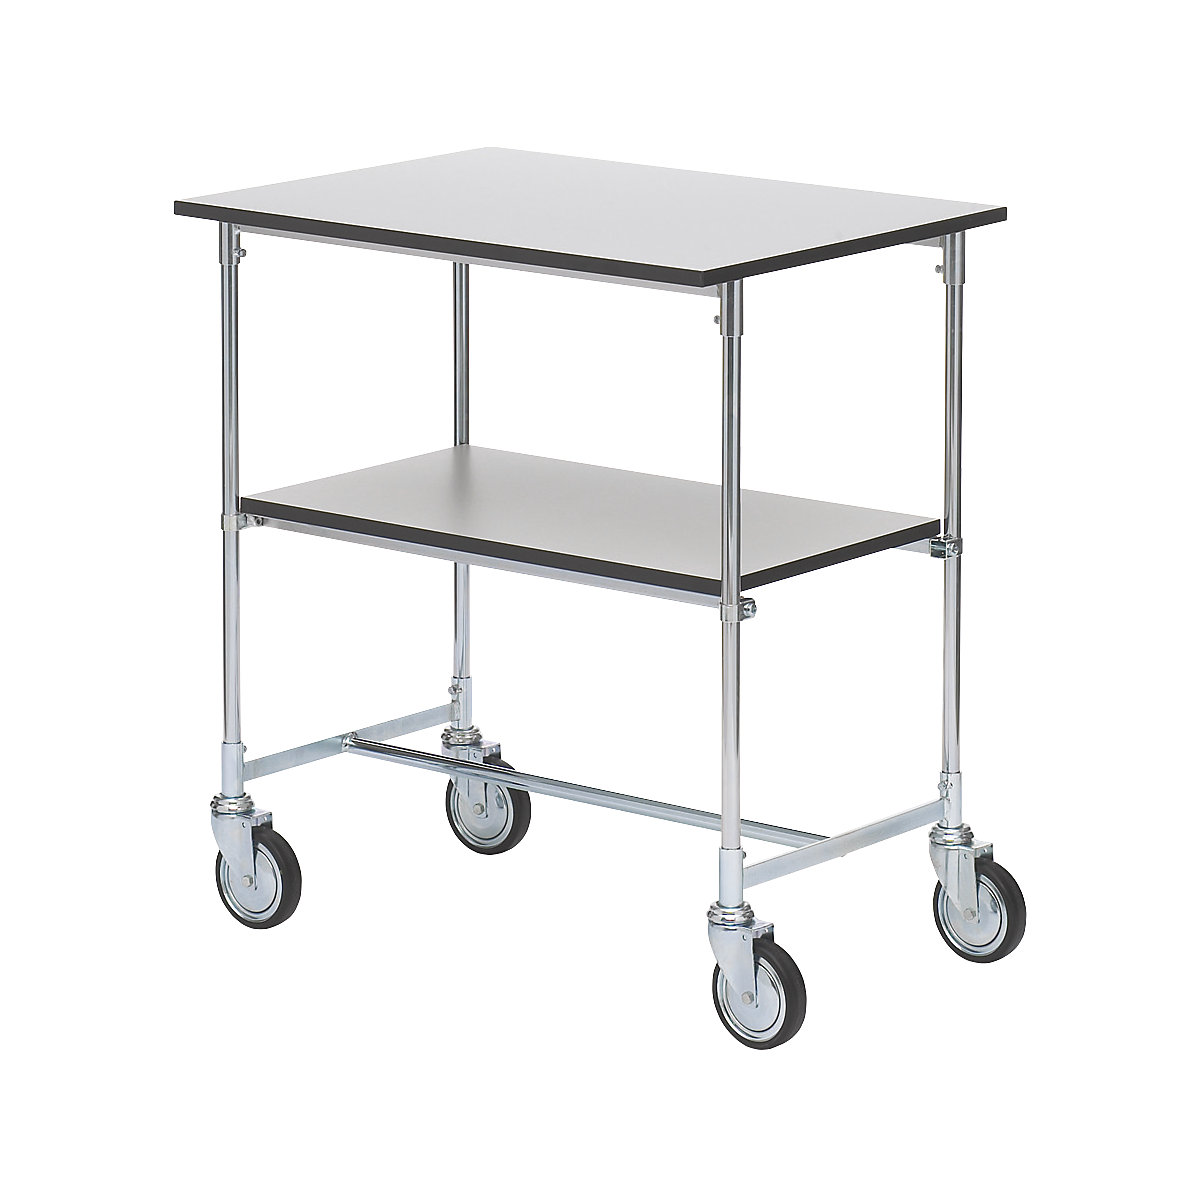 ESD table trolley – HelgeNyberg, 2 shelves, LxW 820 x 600 mm, 5+ items